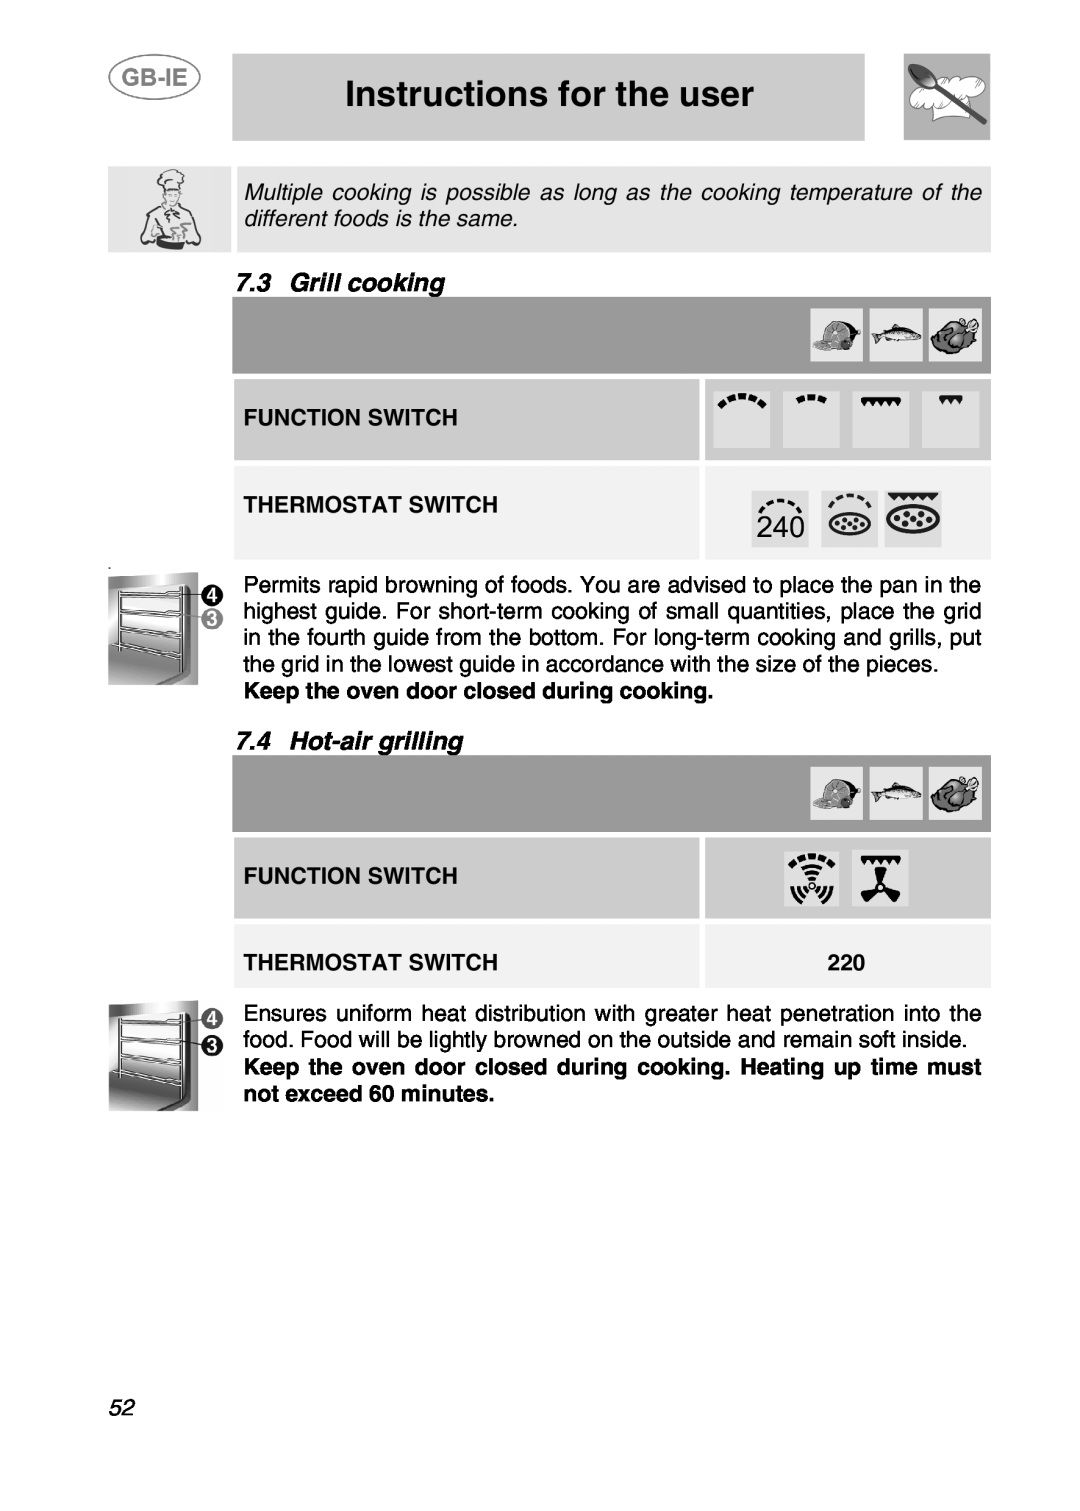 Smeg 166PZ-5 manual Grill cooking, Hot-airgrilling, Instructions for the user, Function Switch Thermostat Switch 